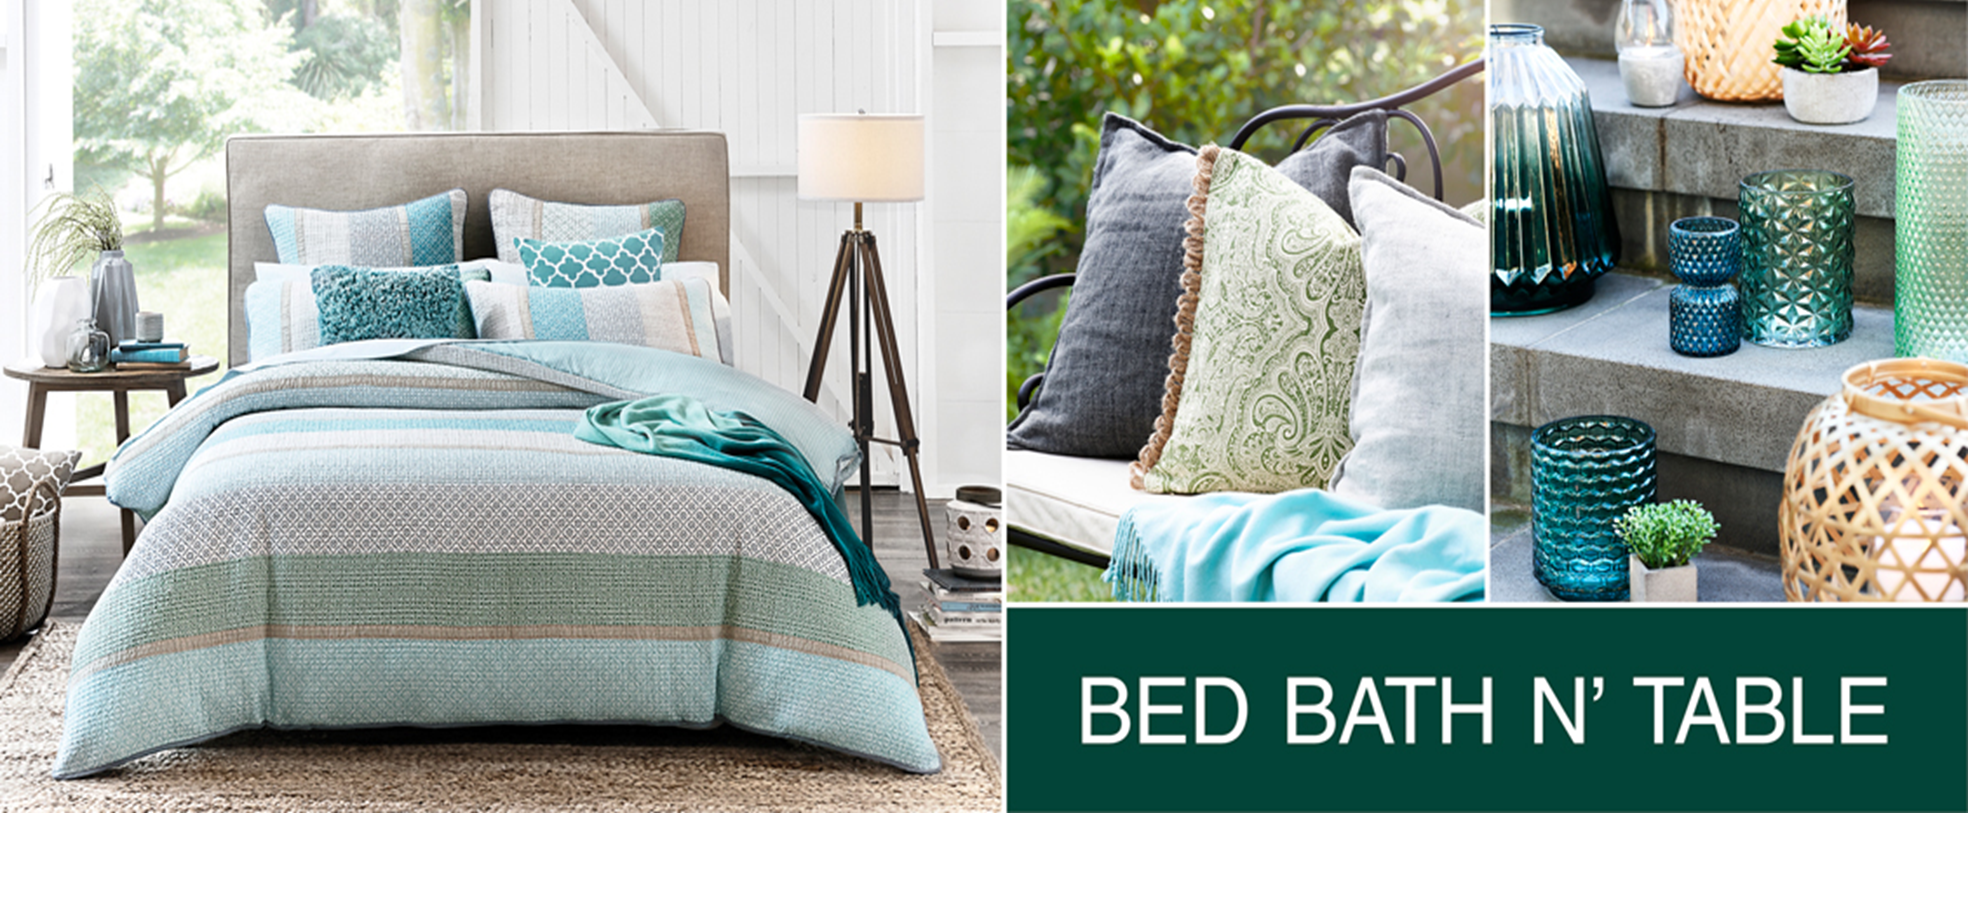 Bed Bath N' Table_Banner.png